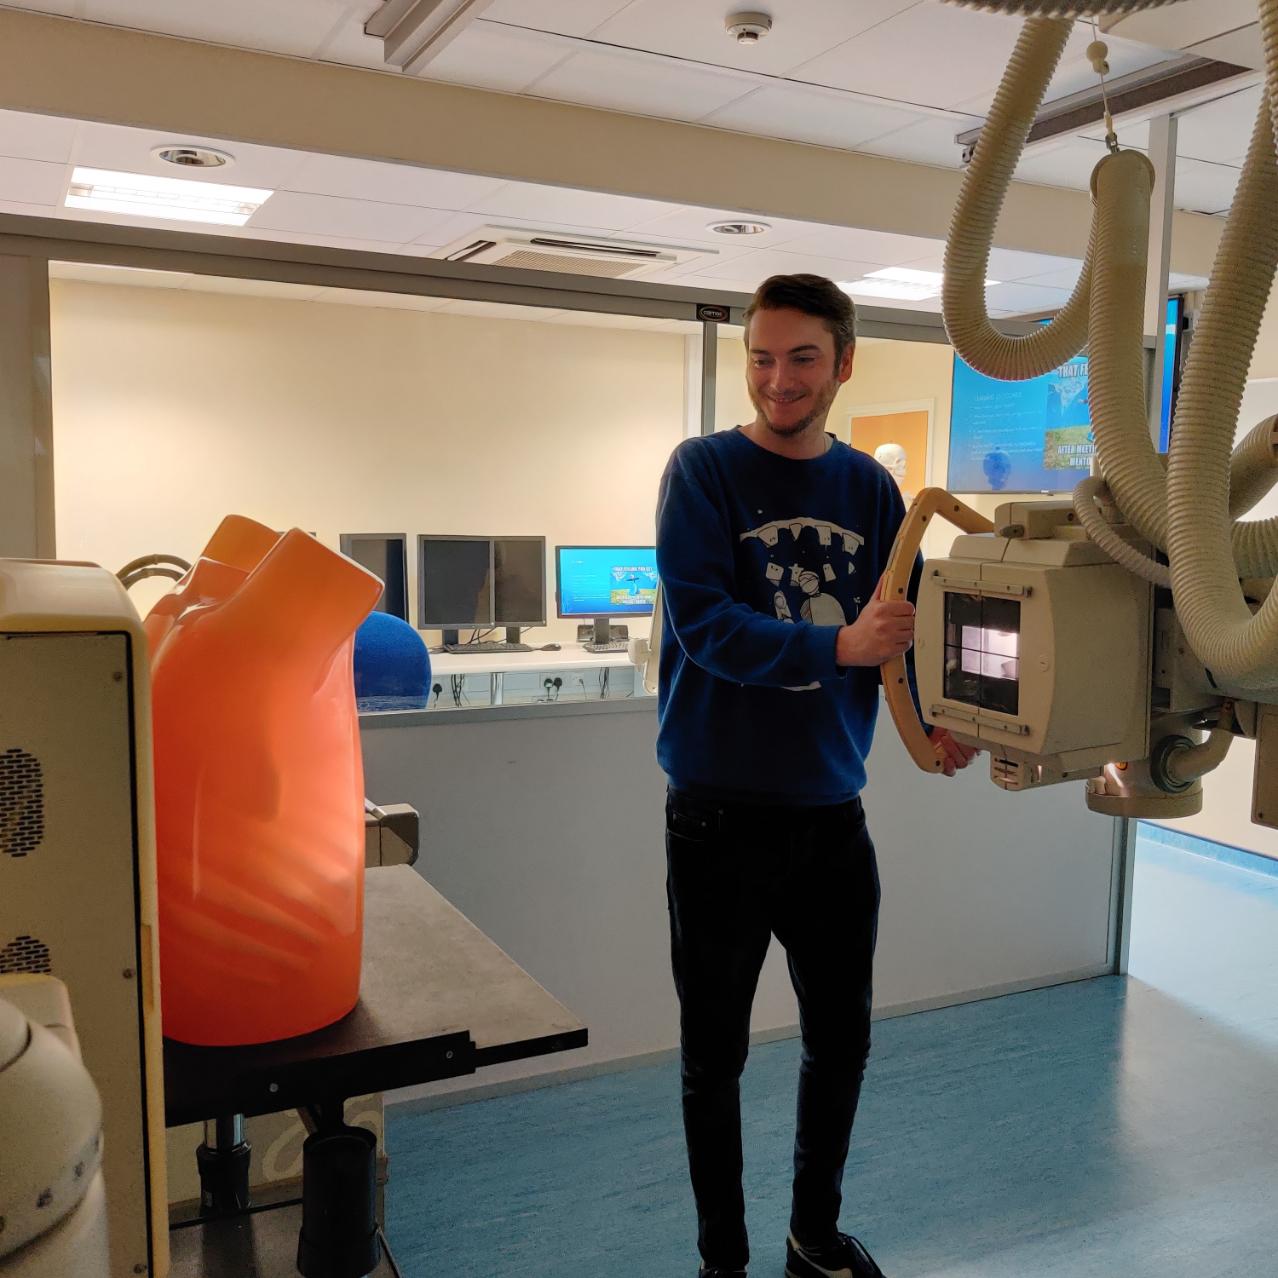 Sam using equipment in the radiography department